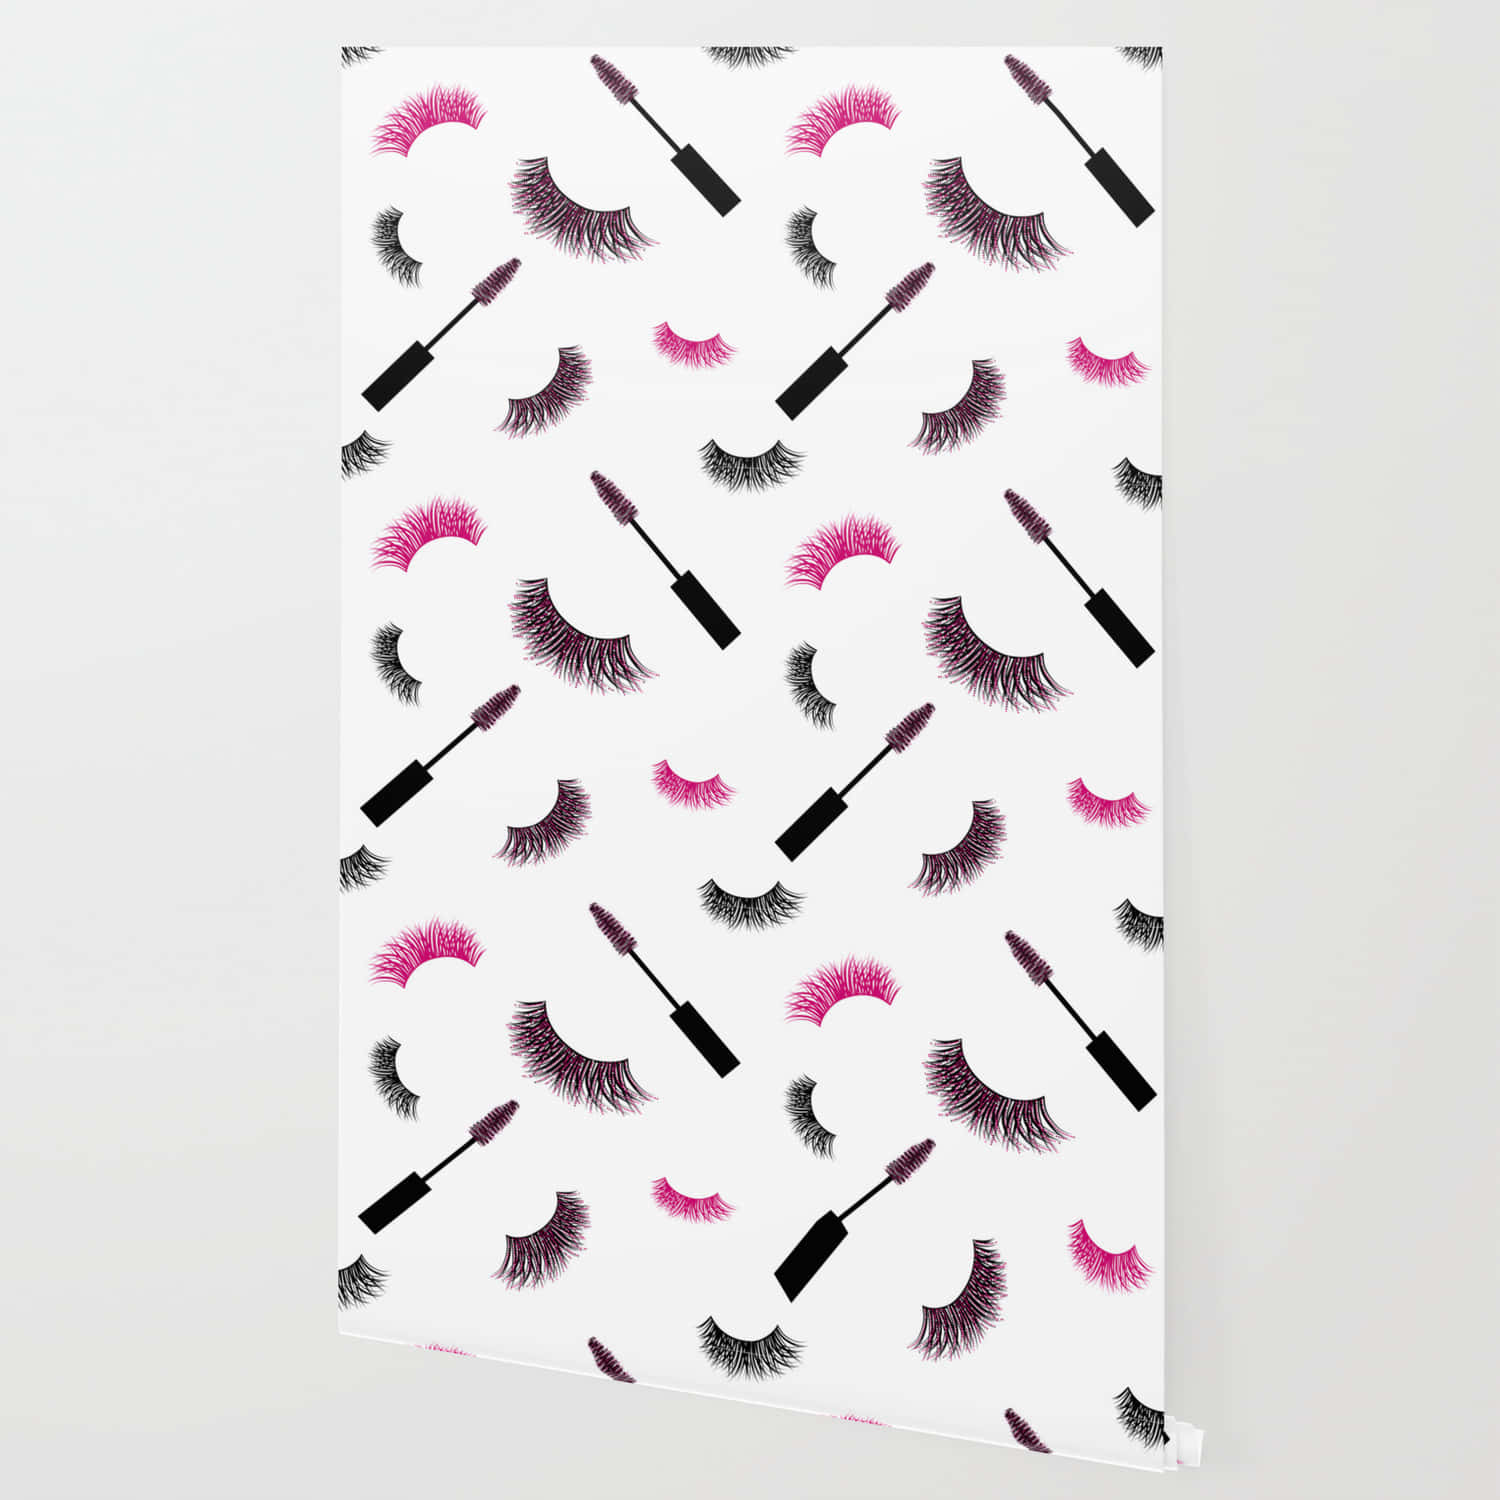 A Wallpaper With Lashes And Mascara On It